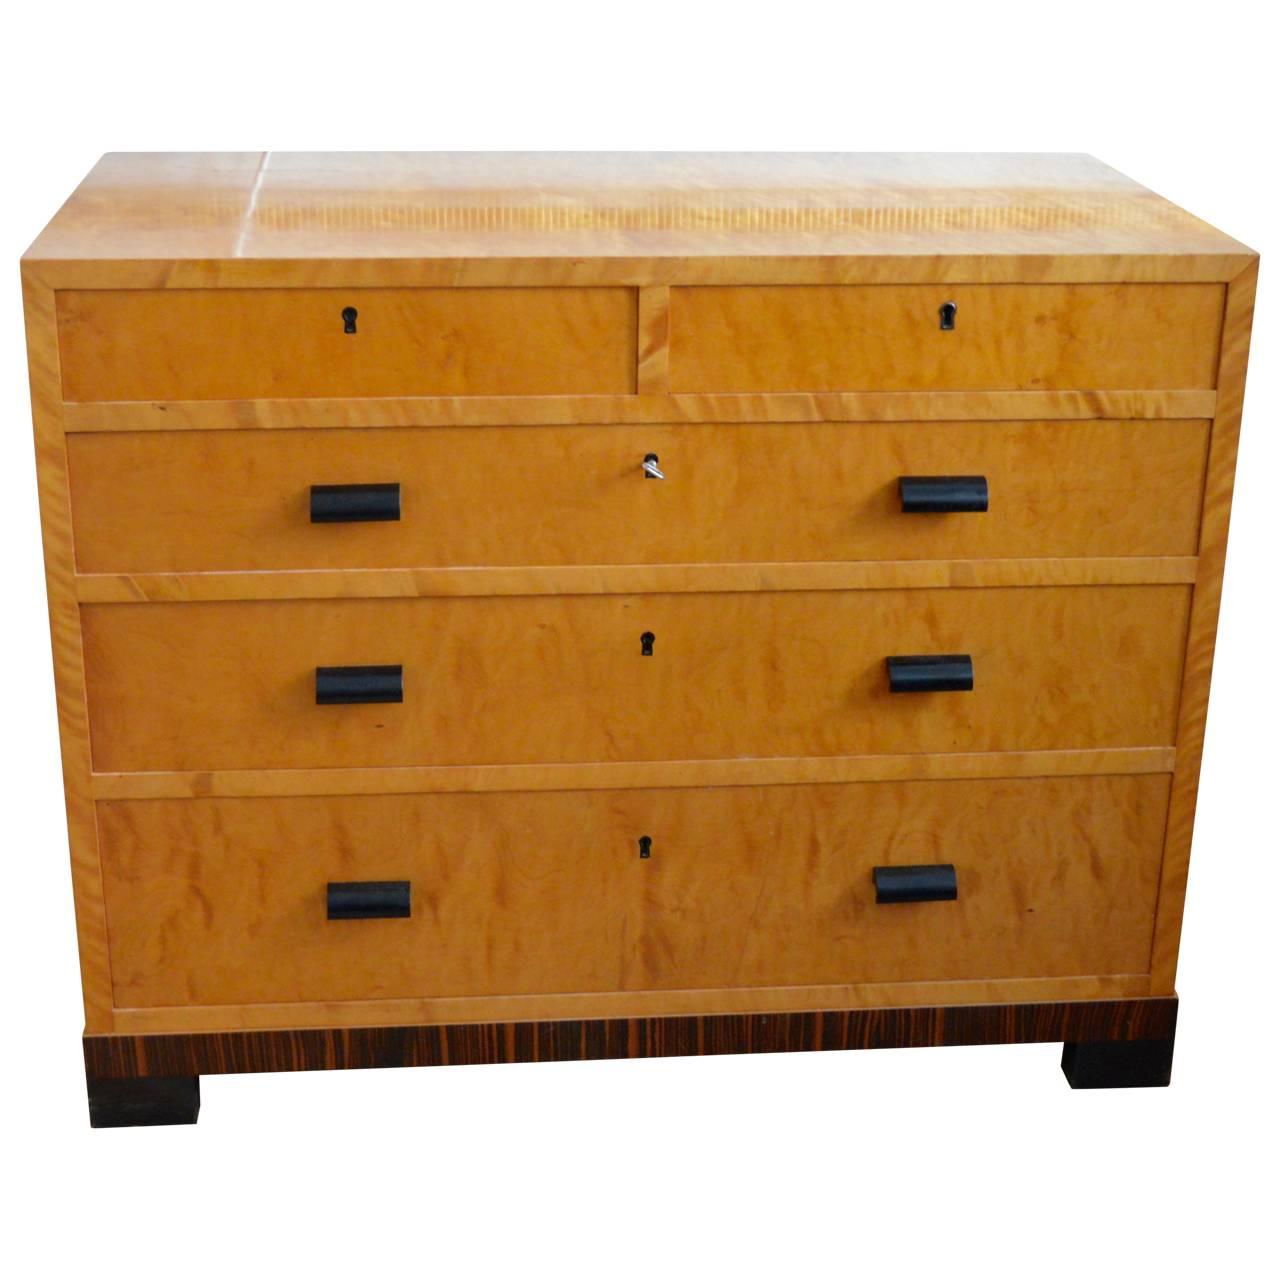 Beautifull satinwood dresser in bircheye marple and zebrawood. With two small drawers and three big ones.